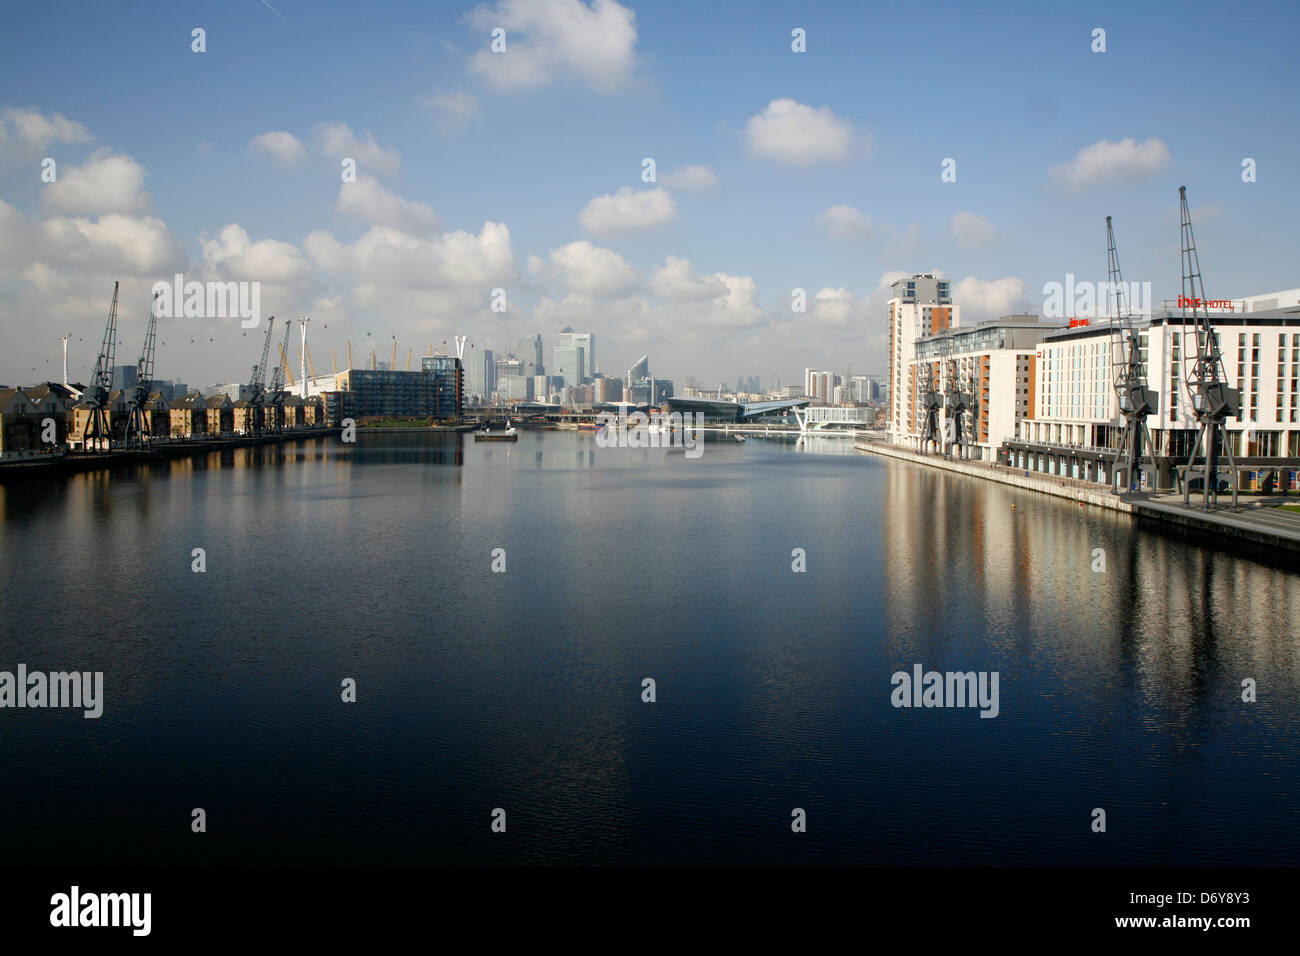 View along Royal Victoria Dock towards Canary Wharf in the far distance, Docklands, London, UK Stock Photo